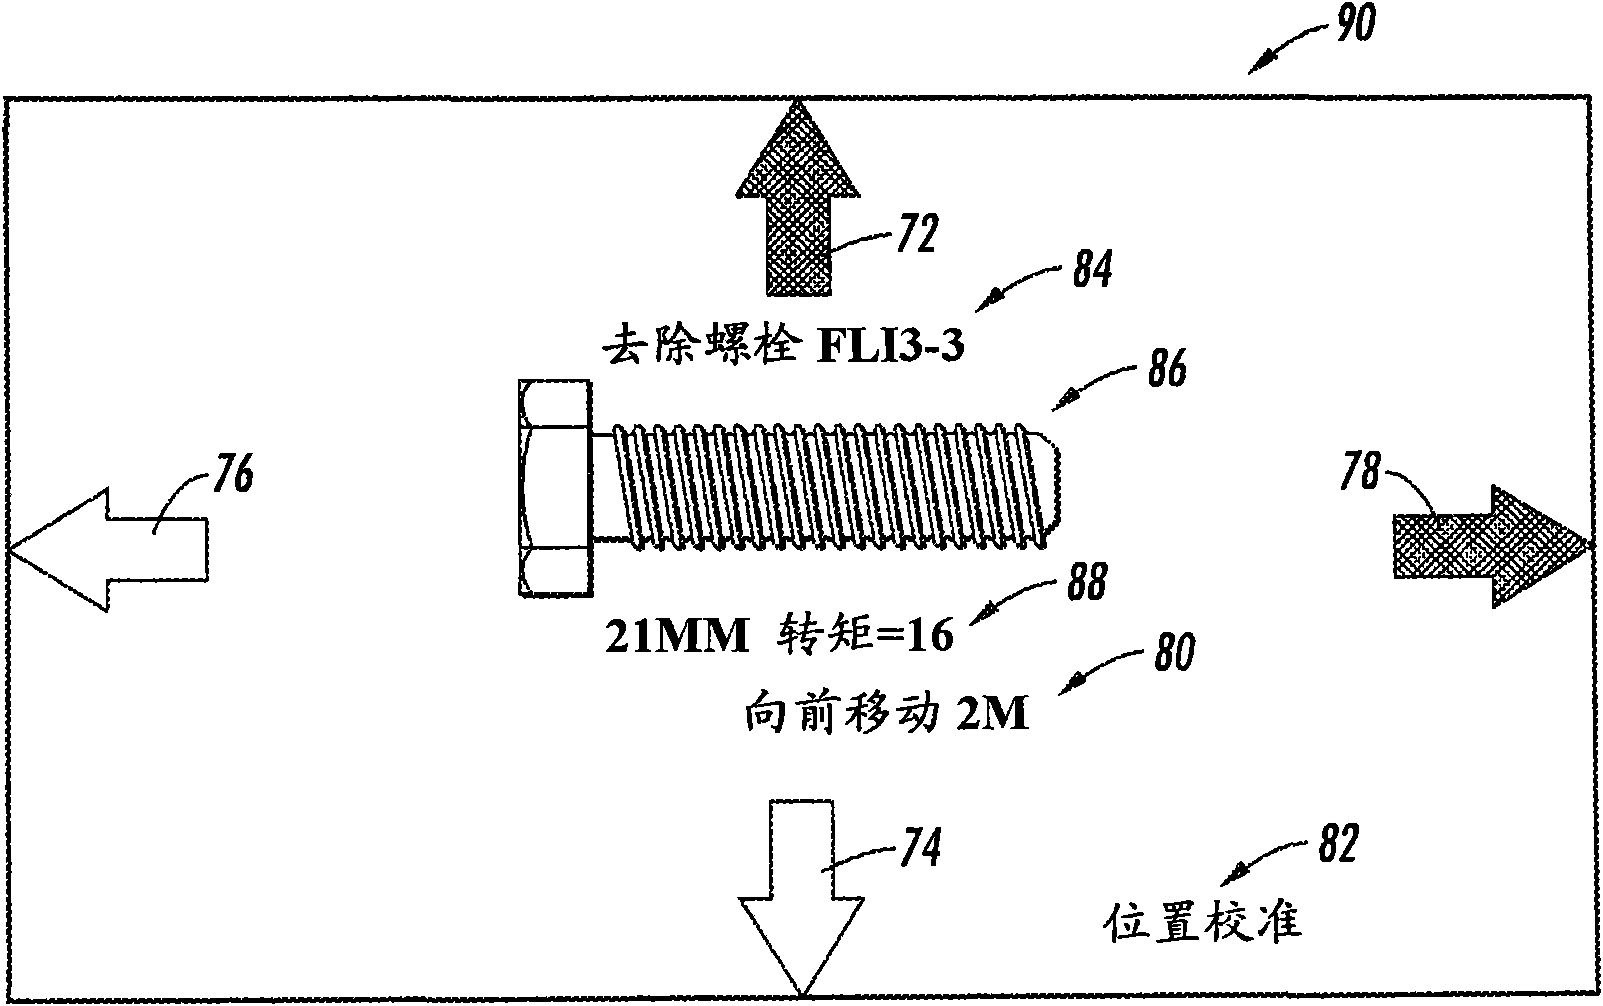 System for reliable collaborative assembly and maintenance of complex systems